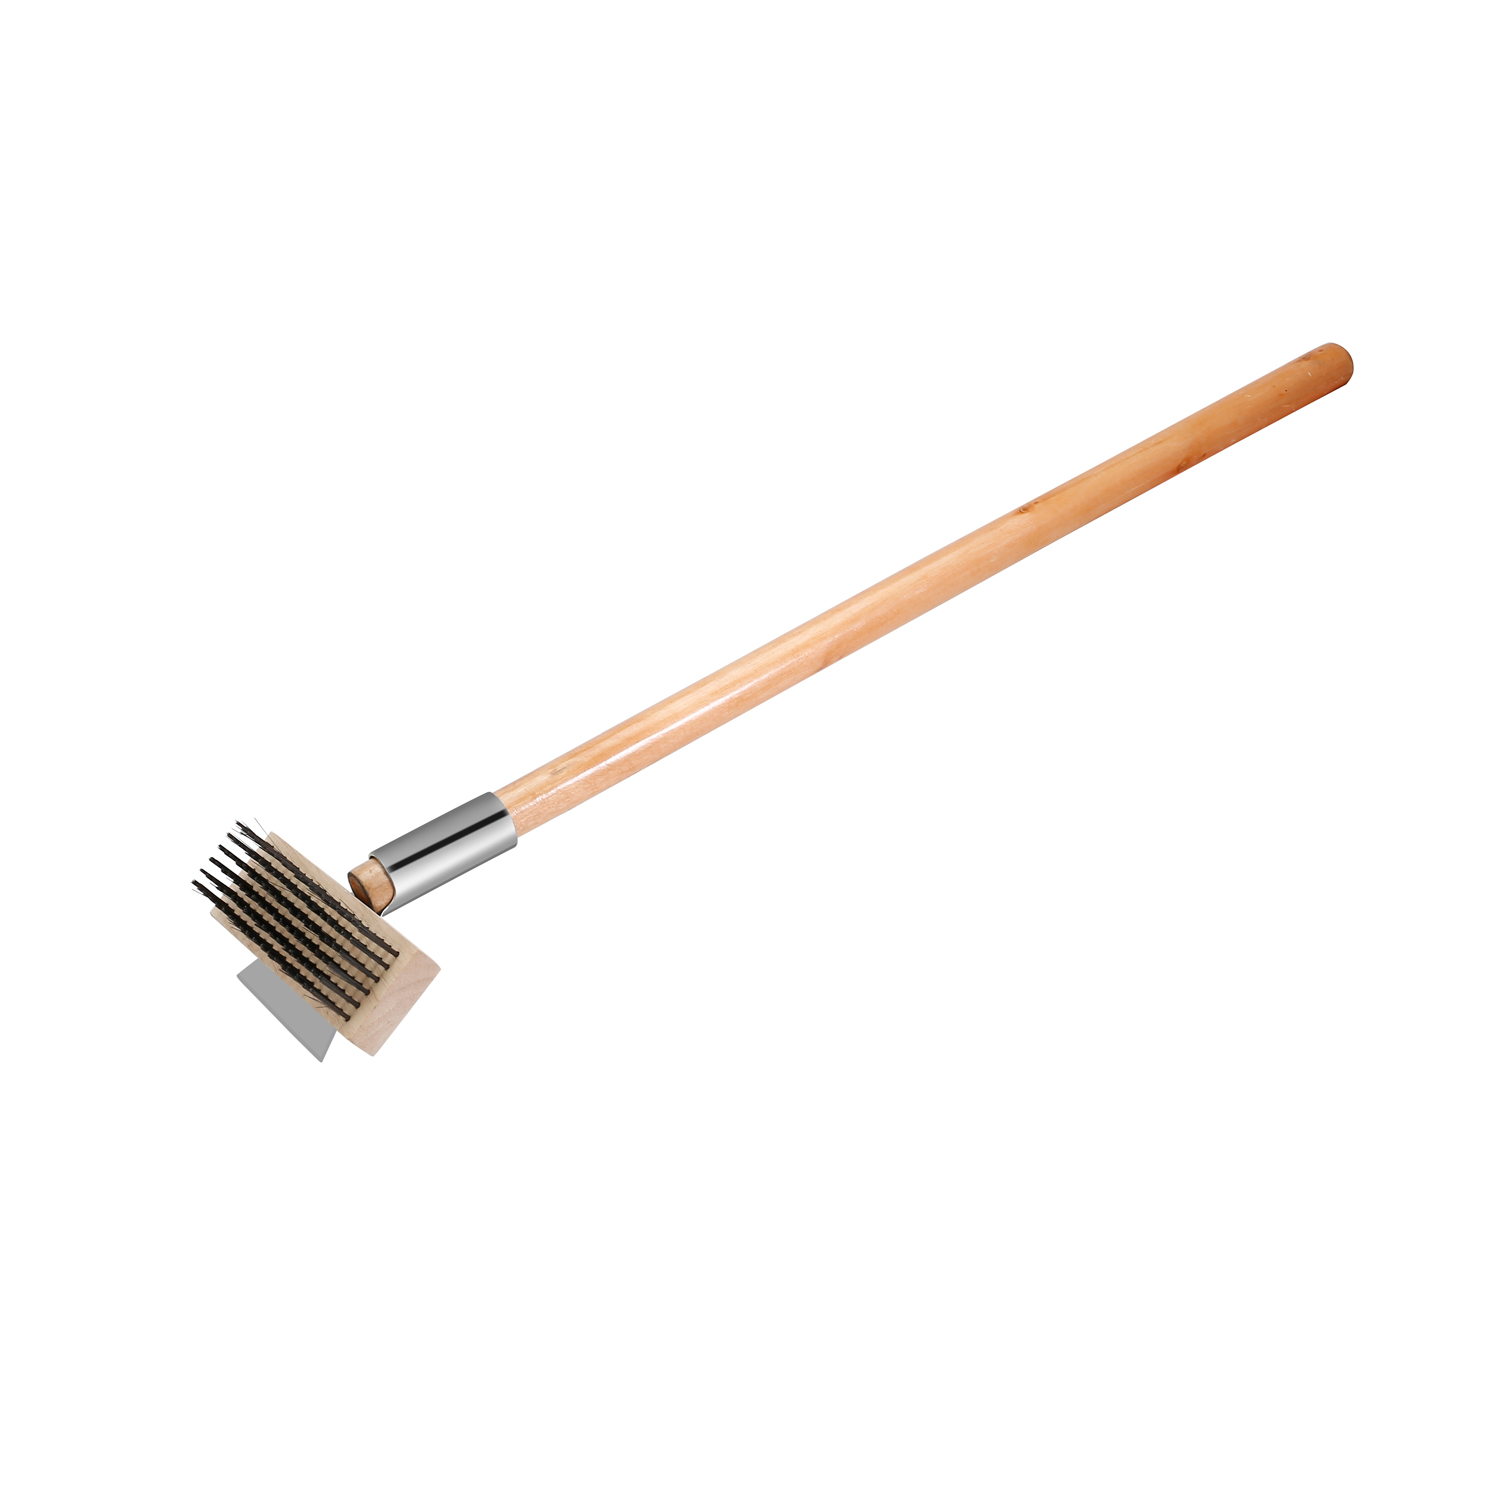 CAC China B2OS-27 Pizza Oven Brush/Scraper with 27" Wood Handle